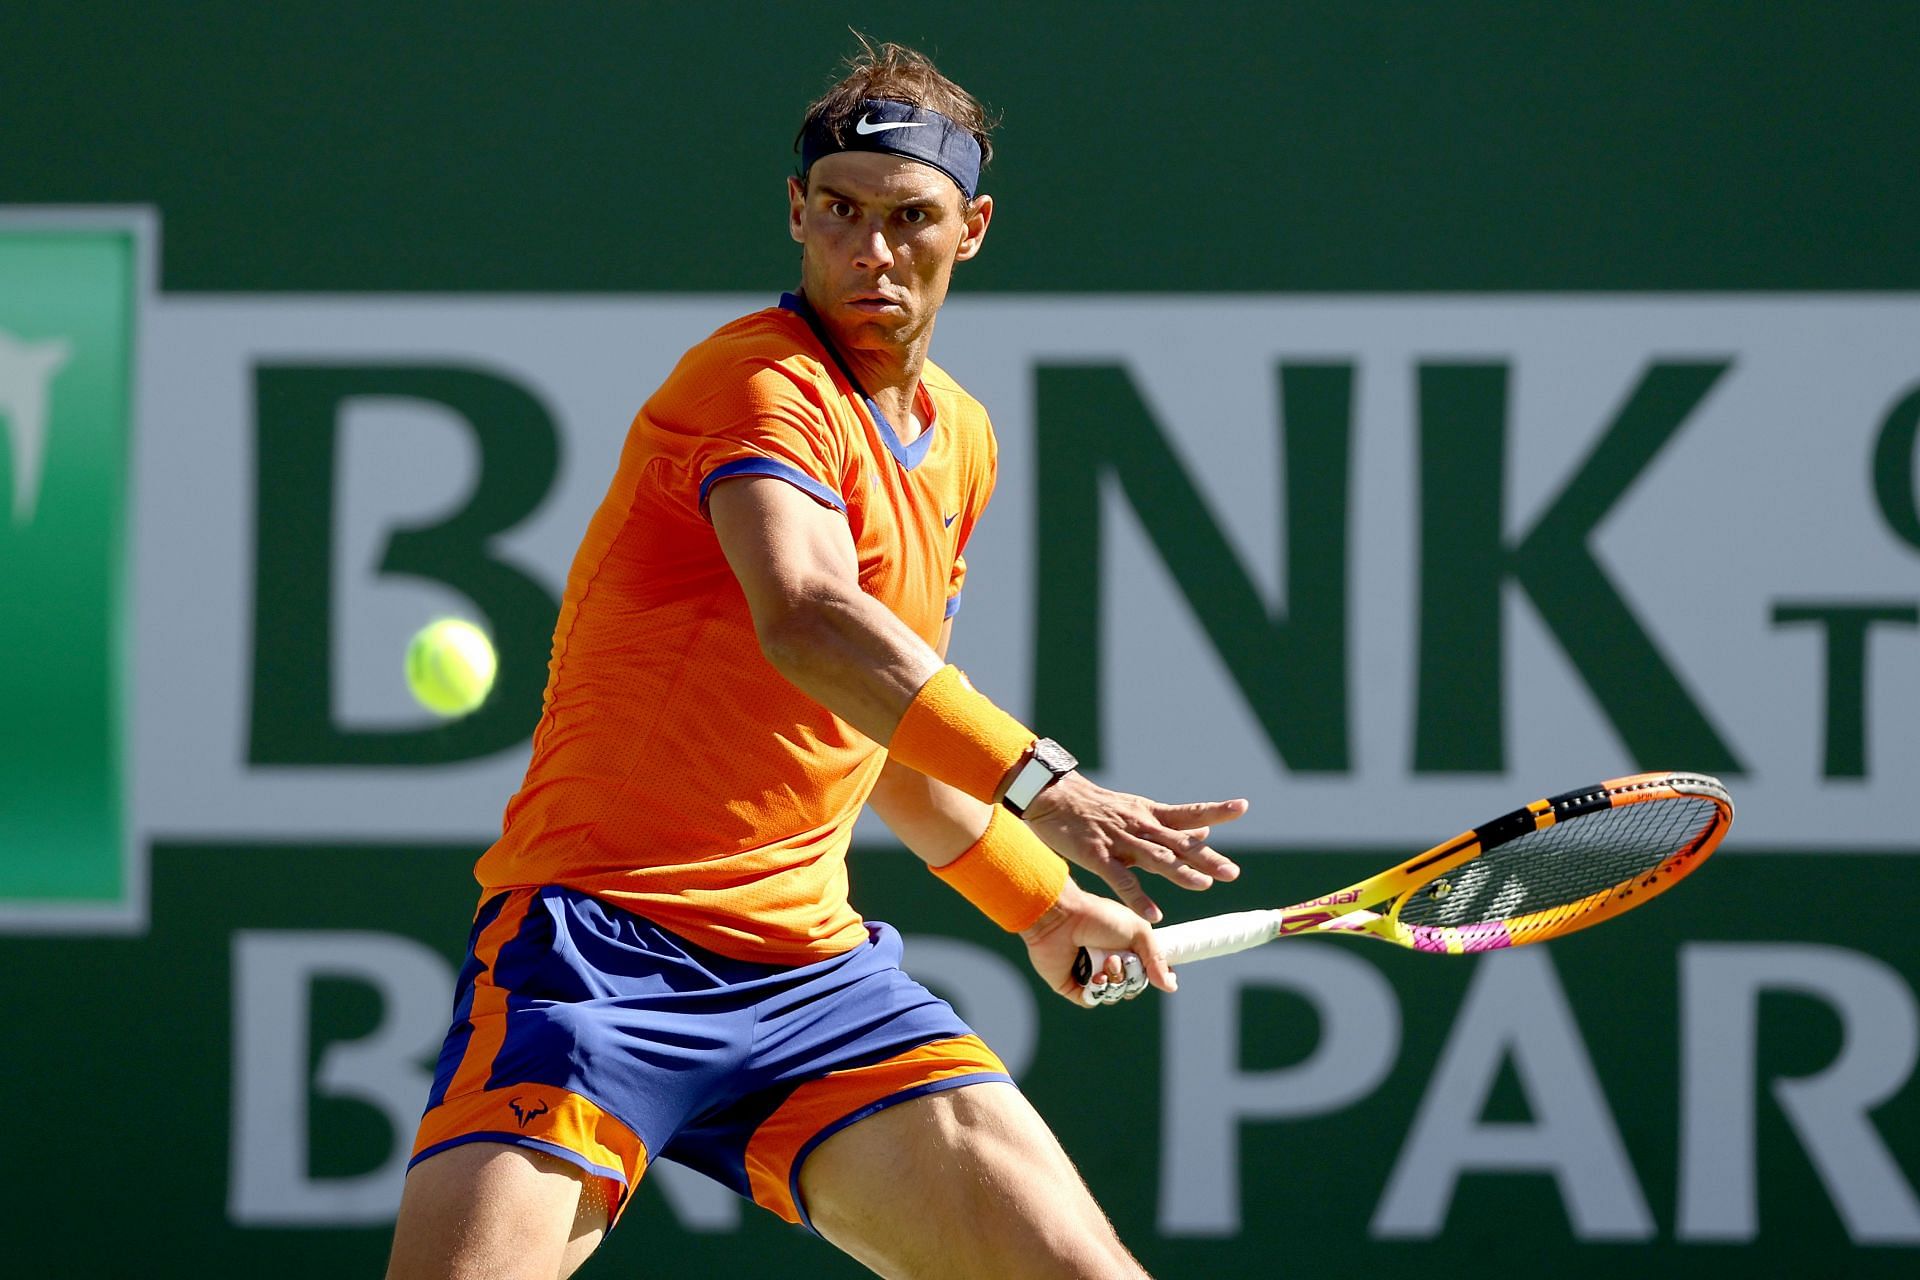 Rafael Nadal manages to win most return games on the ATP tour from the deuce position